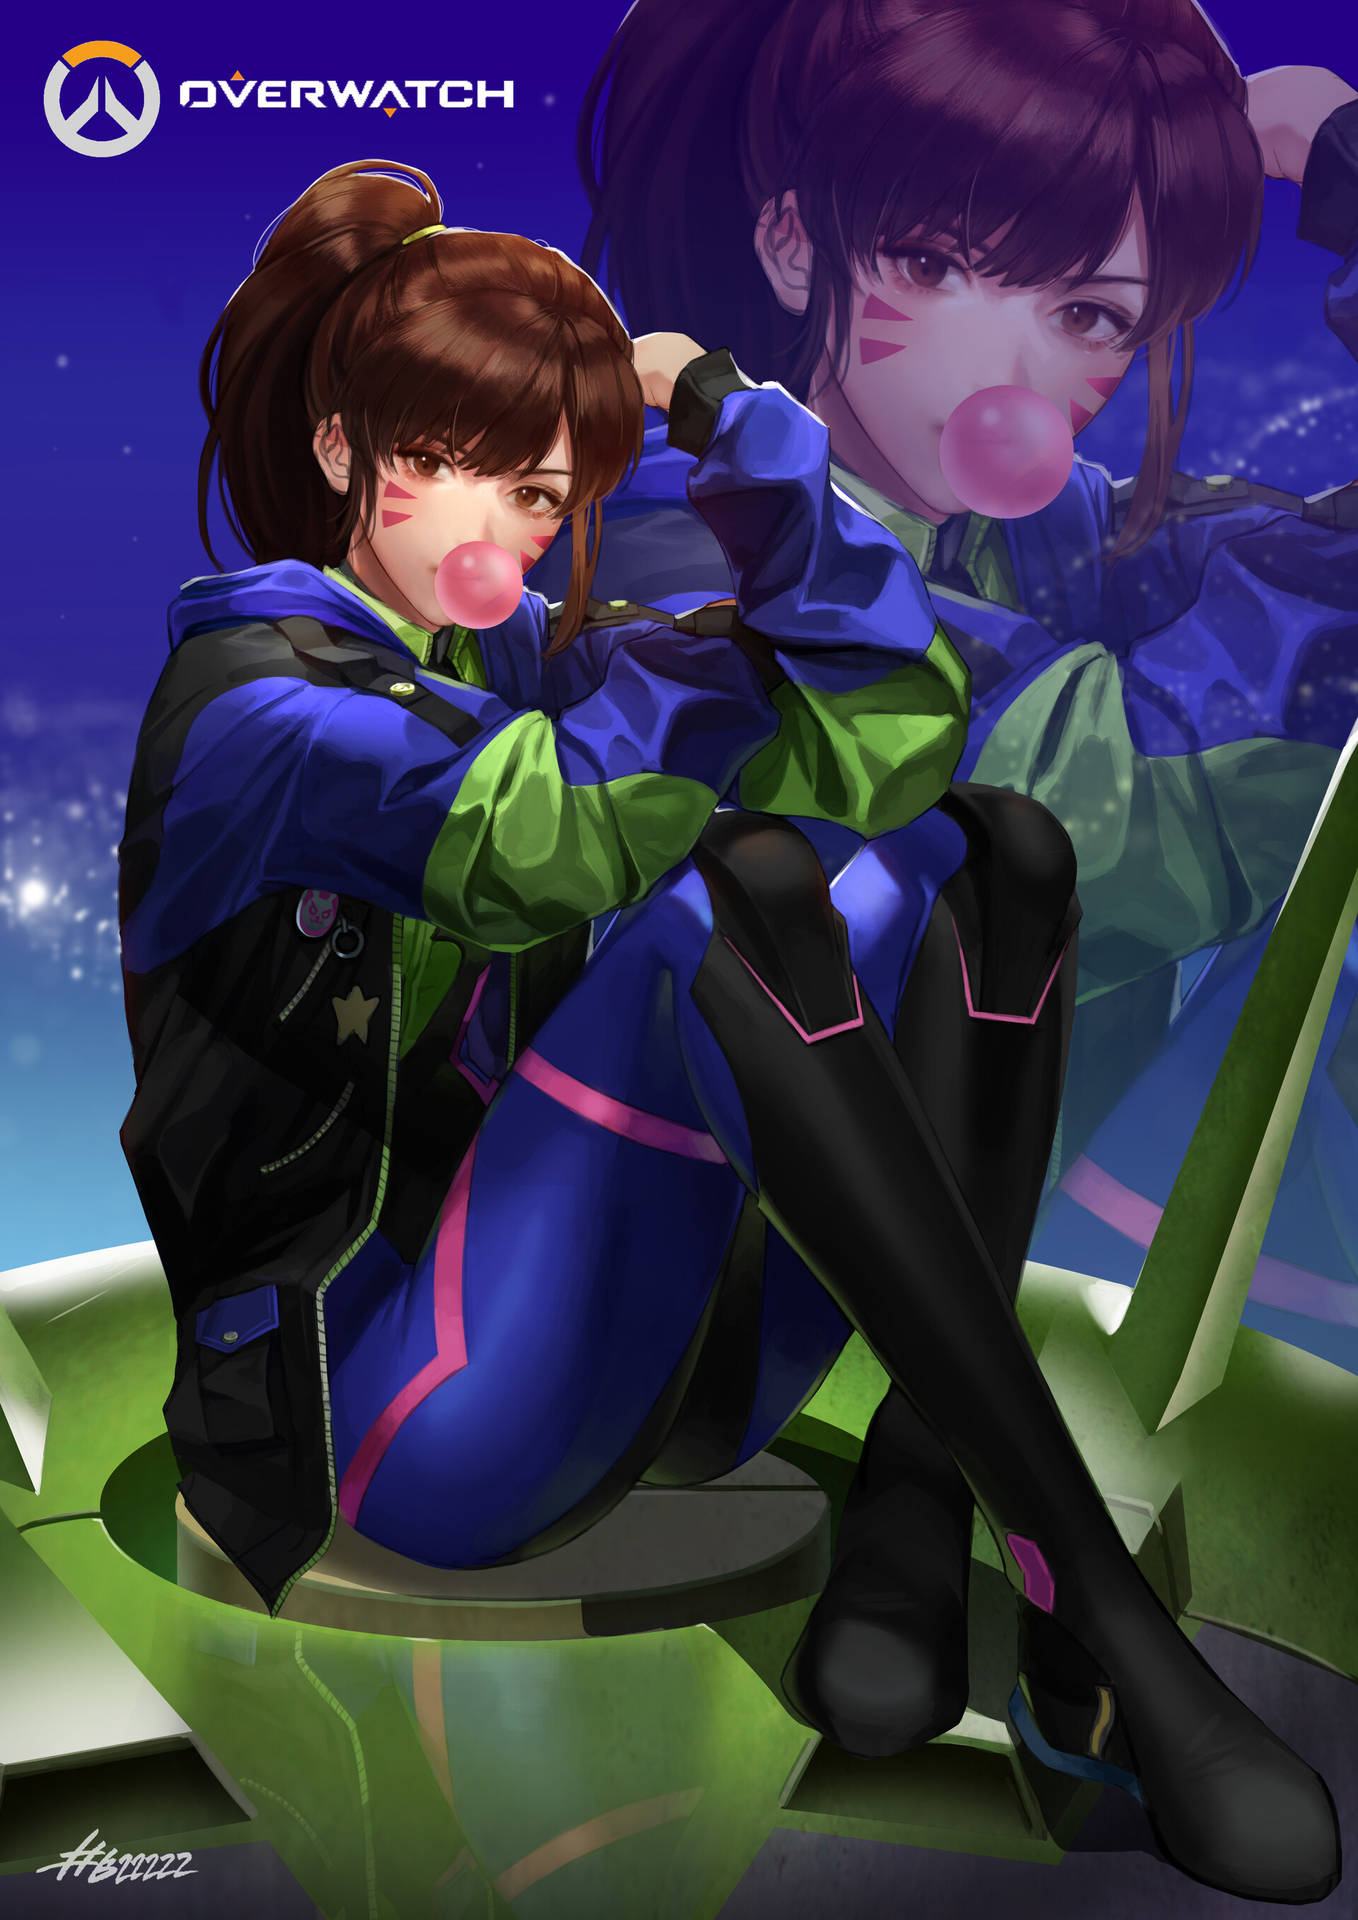 Let's have some fun with Dva! Wallpaper